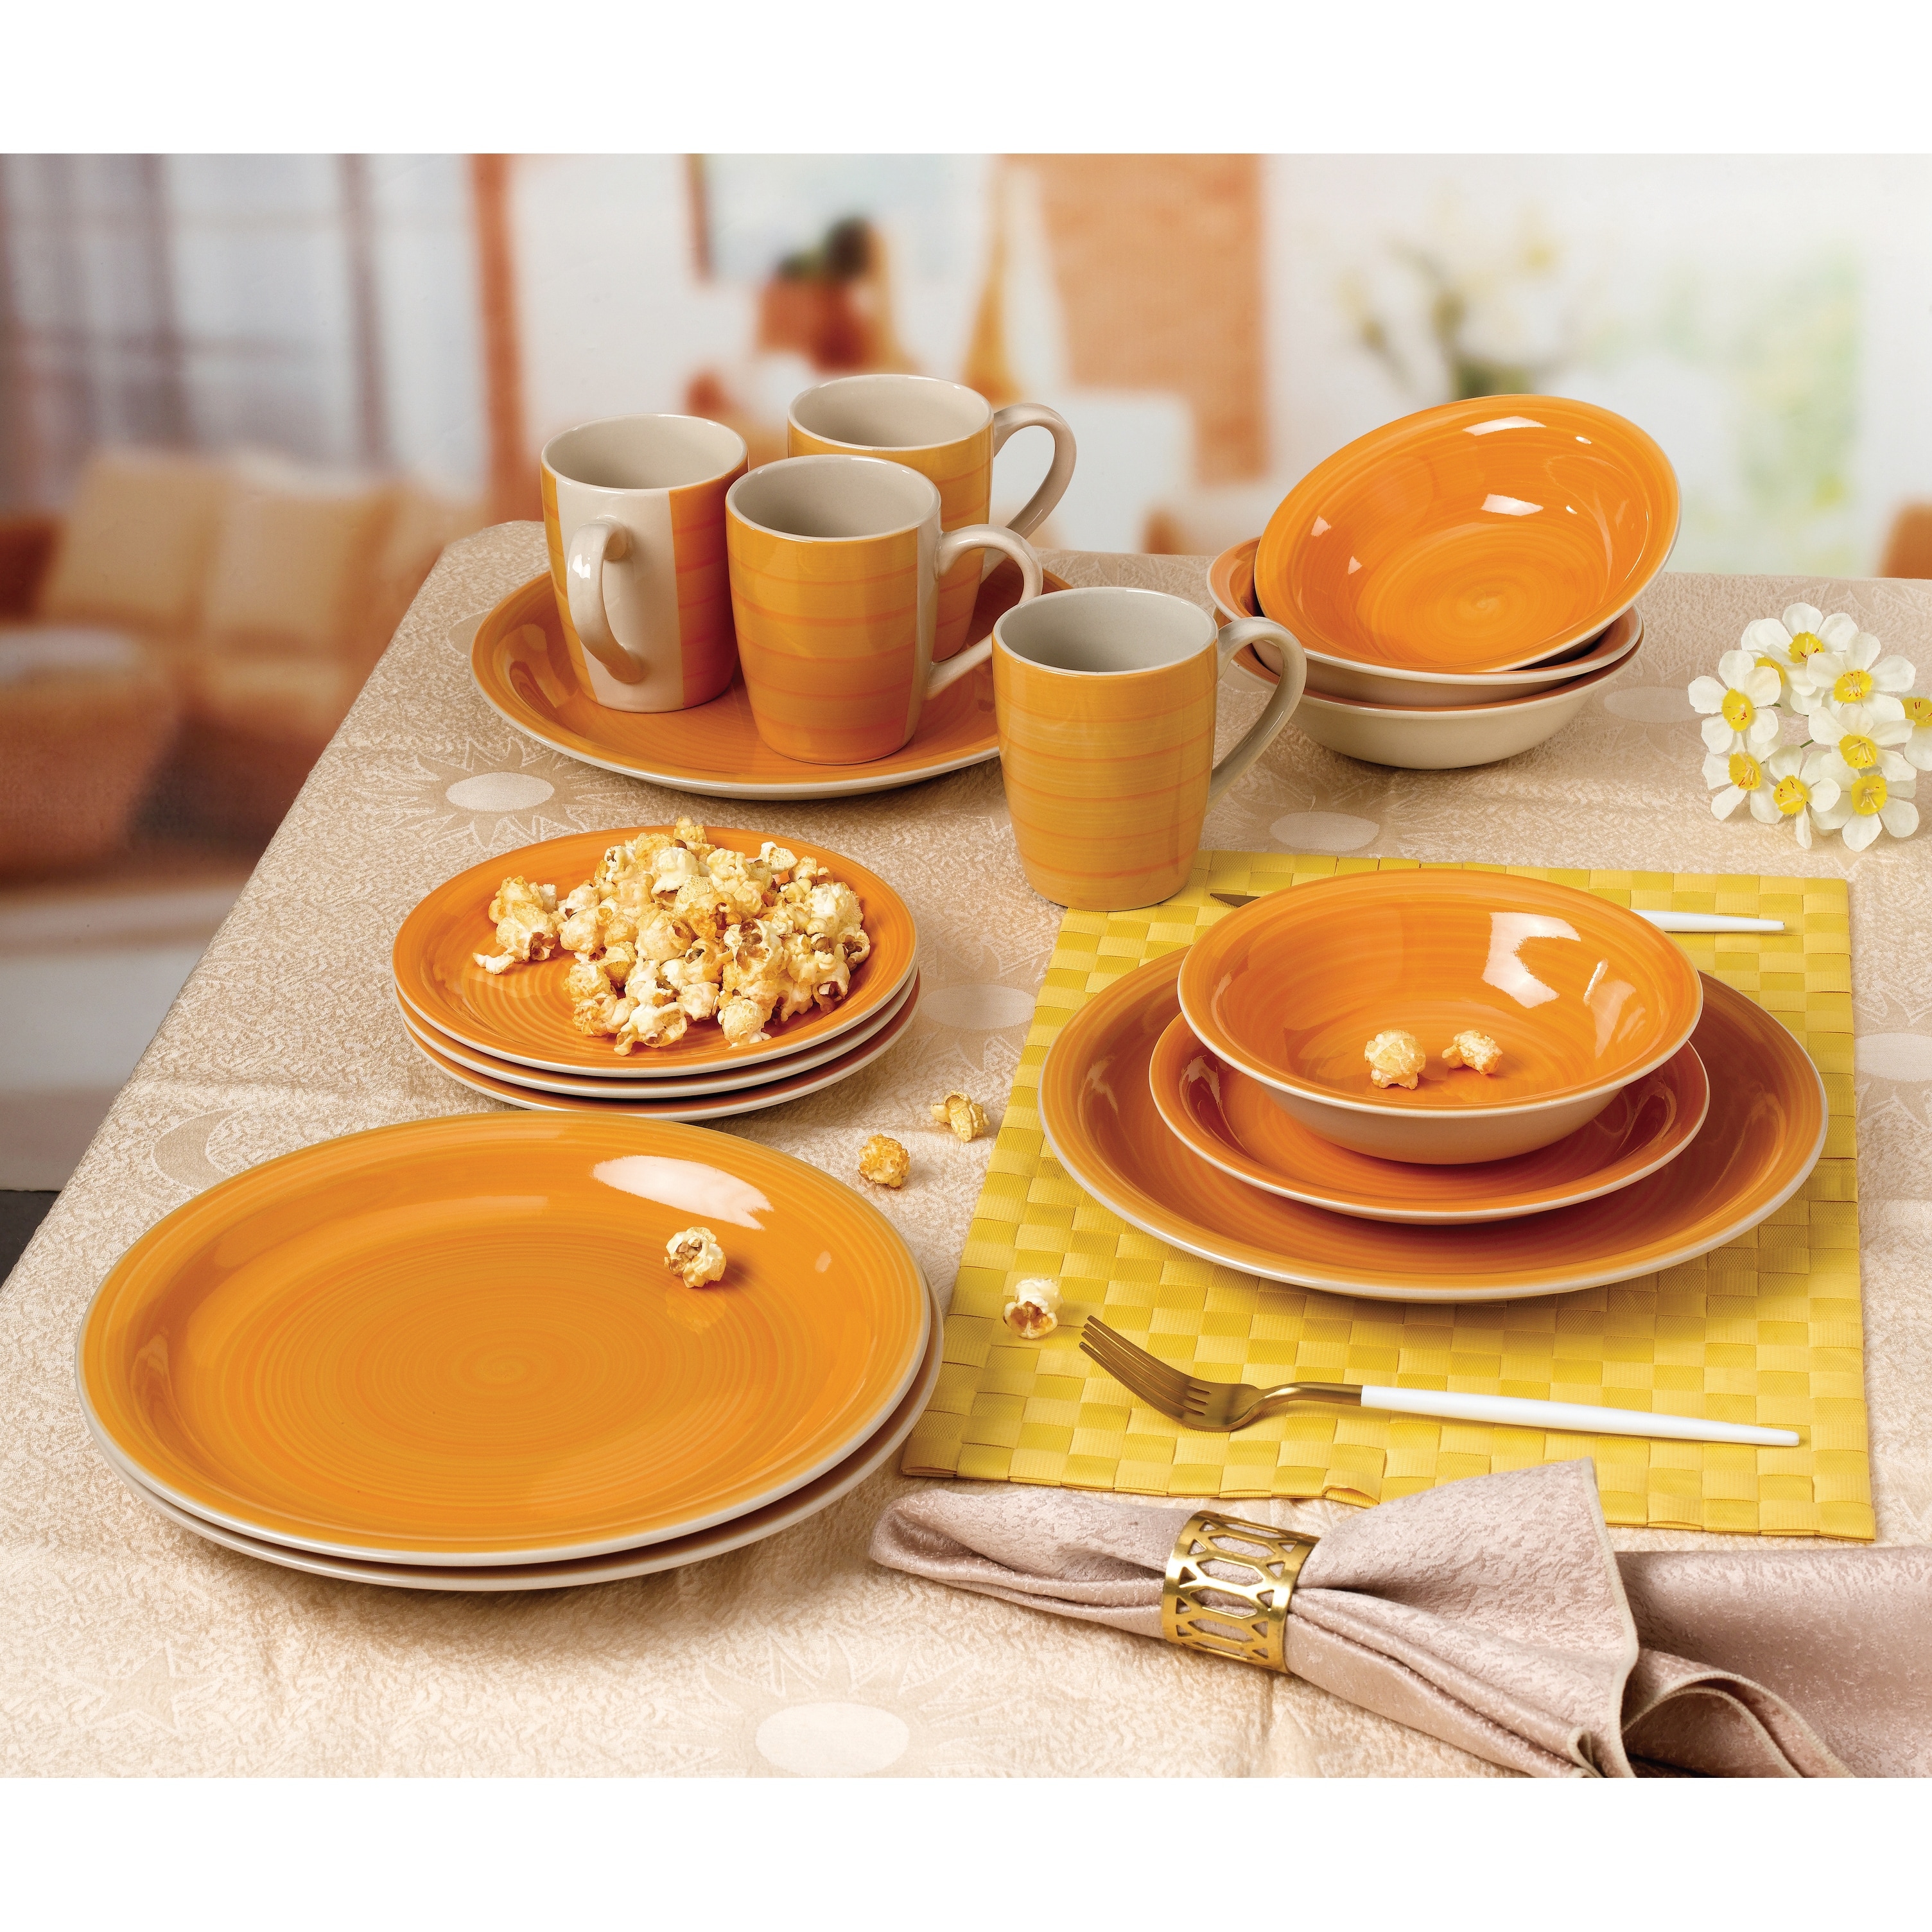 https://ak1.ostkcdn.com/images/products/is/images/direct/9c00ebaf913231d31fe568706f25eebfc00bb050/16-Piece-Hand-Painted-Color-Dinnerware-Set%2C-Service-for-4.jpg